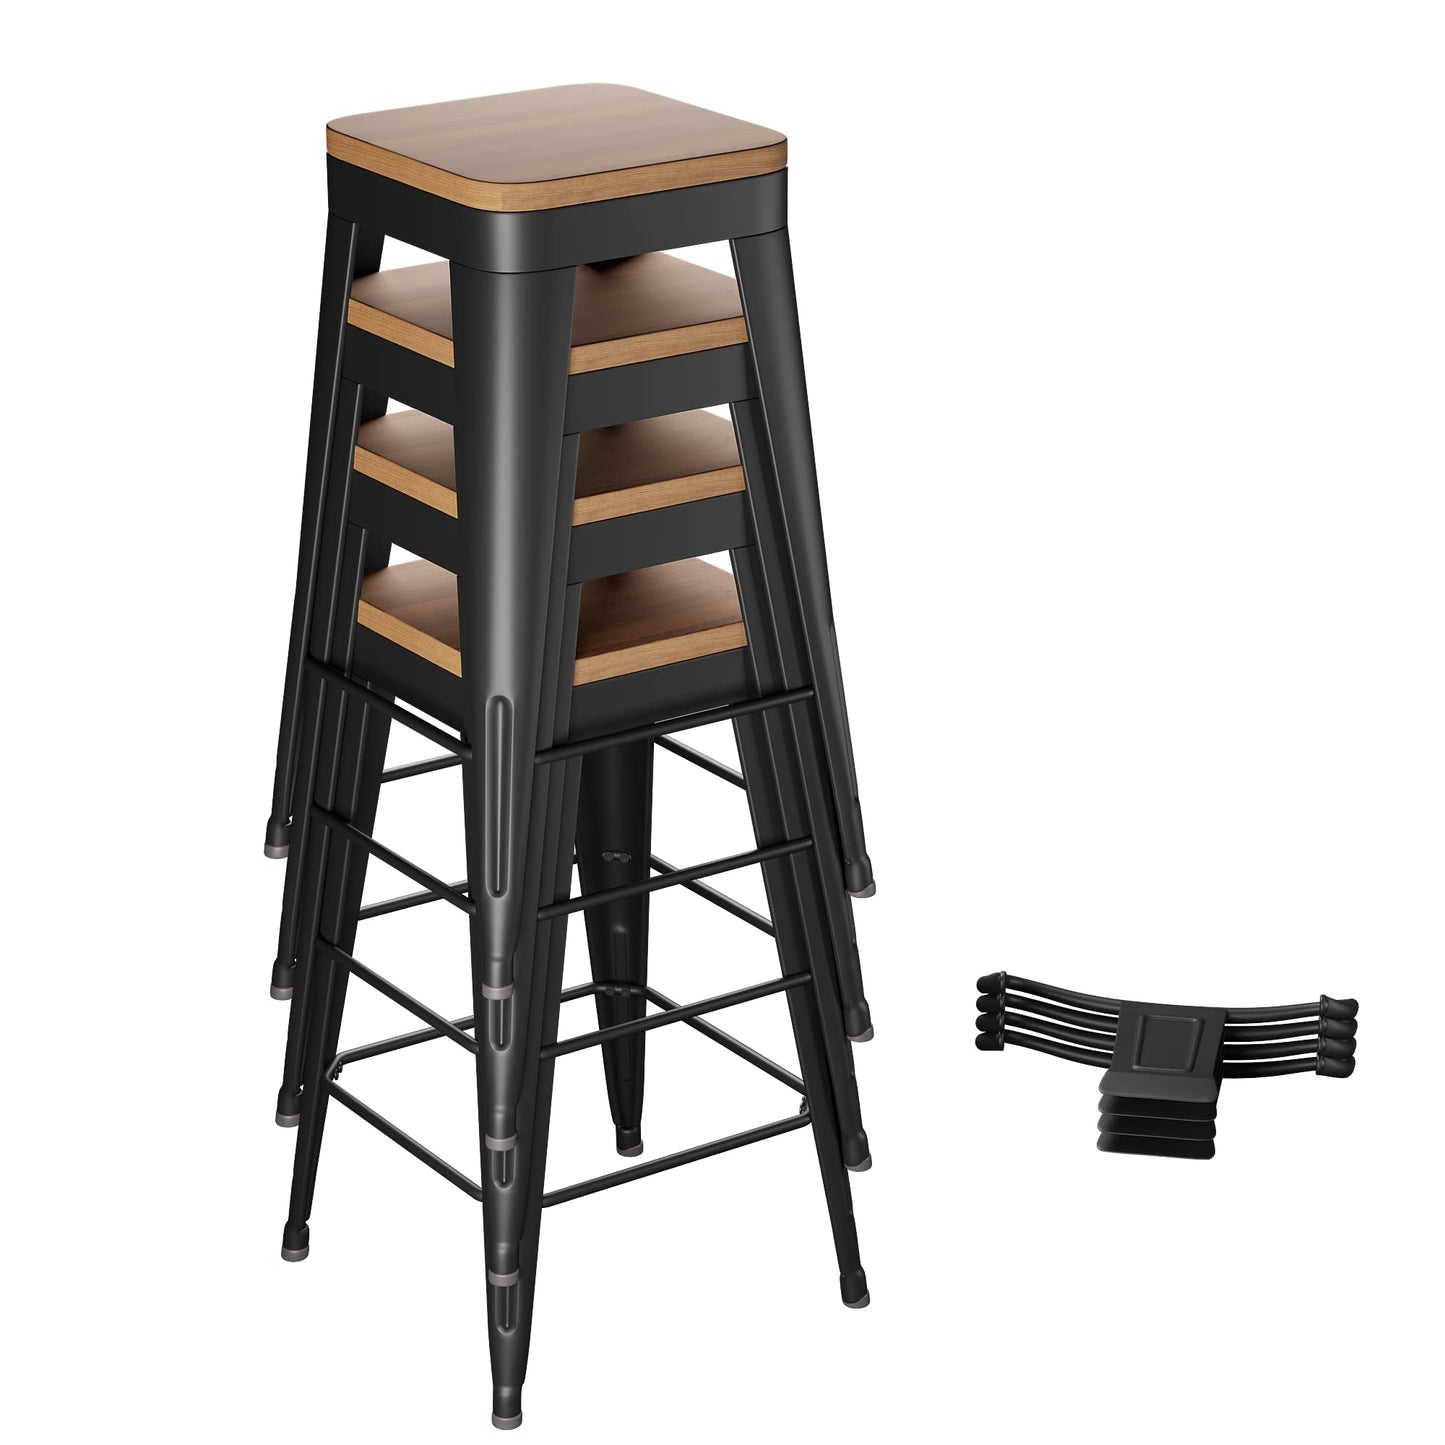 POINTANT Bar Stools Set of 4 Metal Bar Stool Counter Height Bar Stools Black, Modern Bar Chairs with Back and Wooden Seat 30" Bar Stools Counter